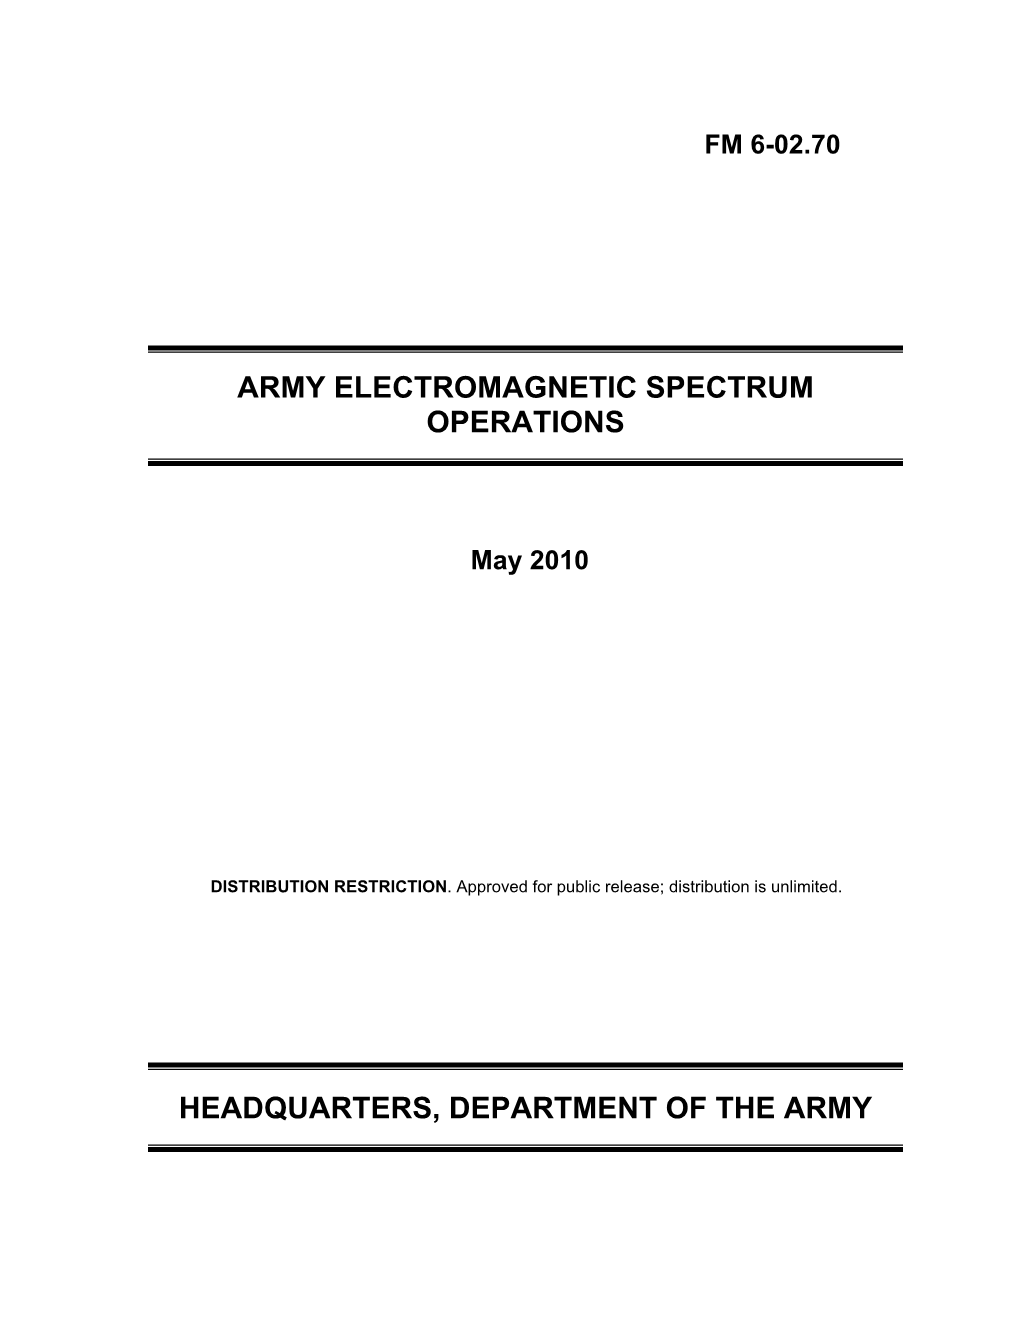 FM 6-02.70. Army Electromagnetic Spectrum Operations